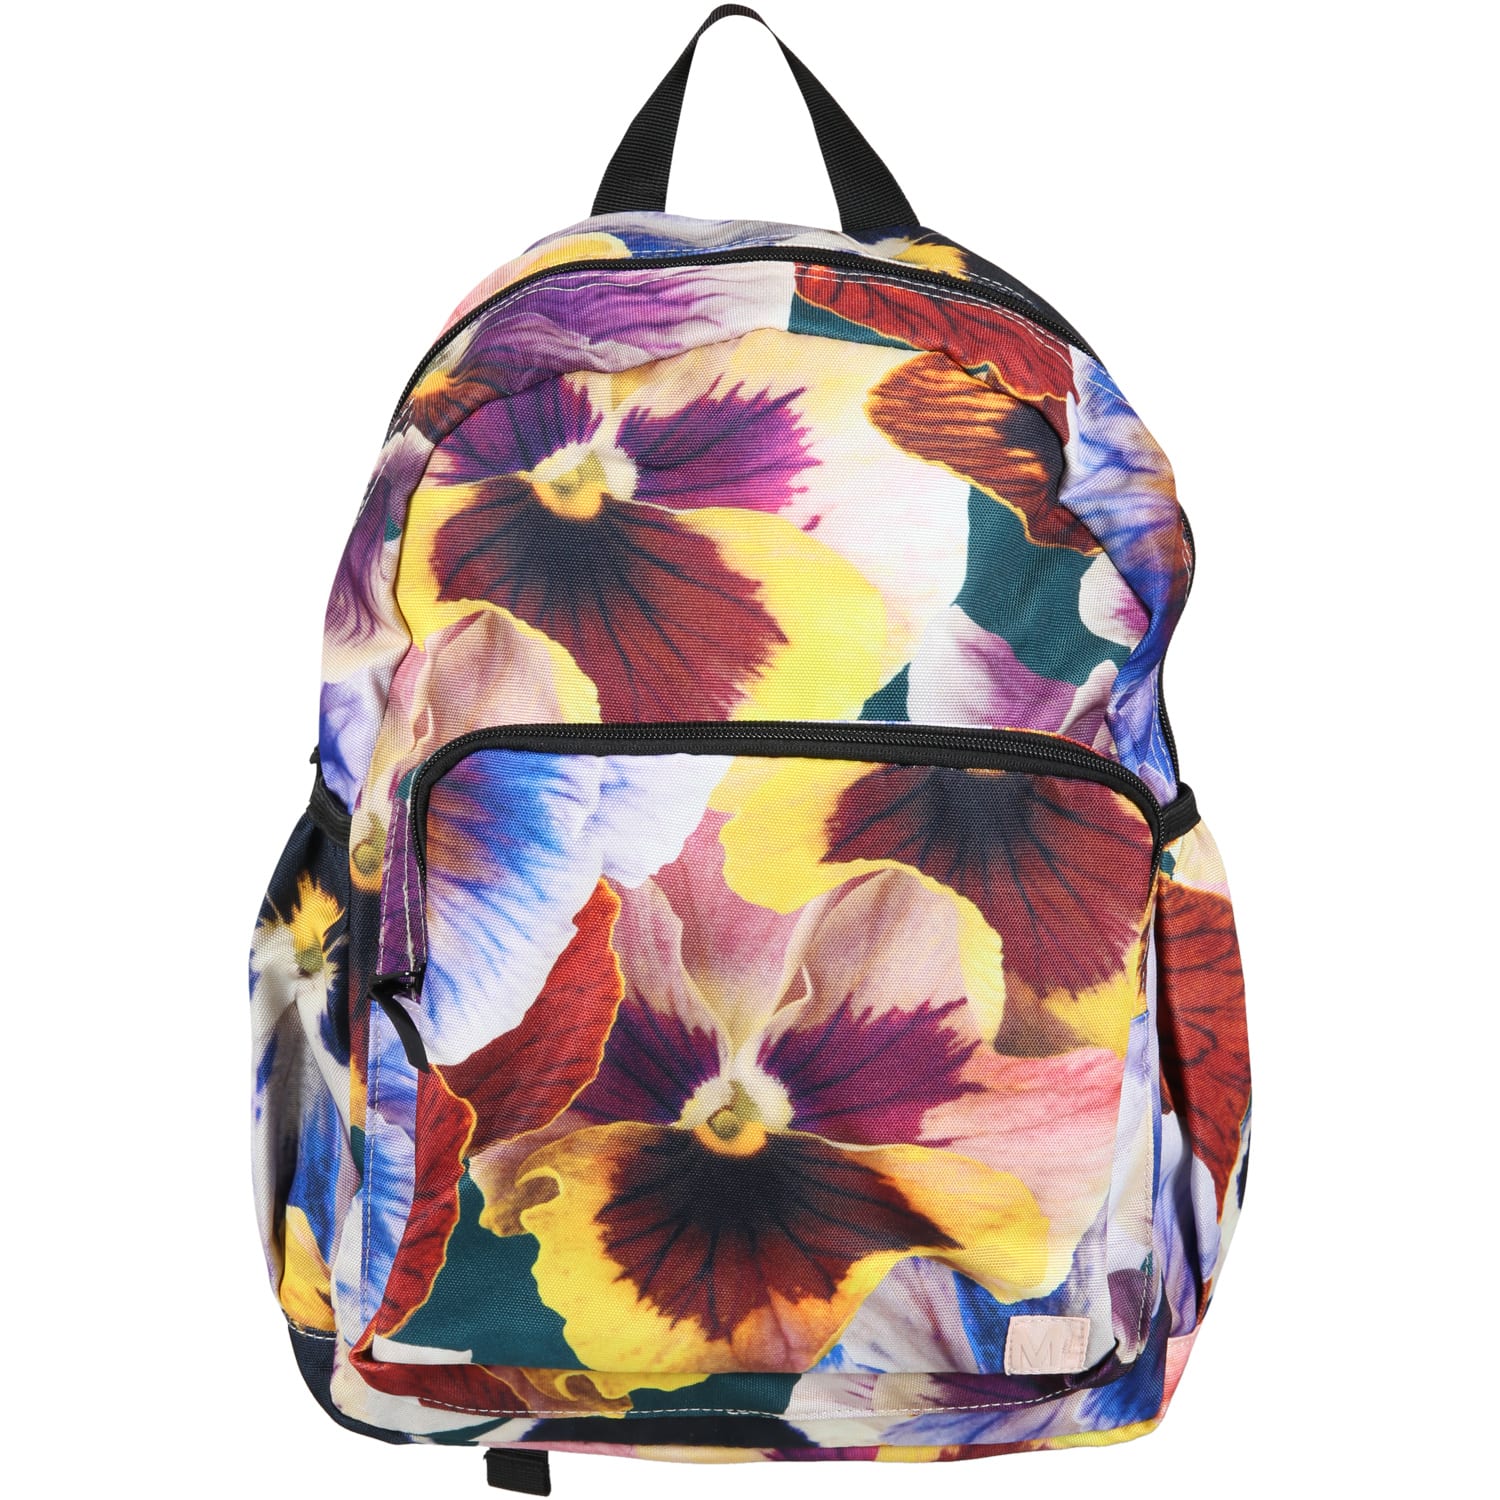 Molo Multicolor Backpack For Girl With Floral Print